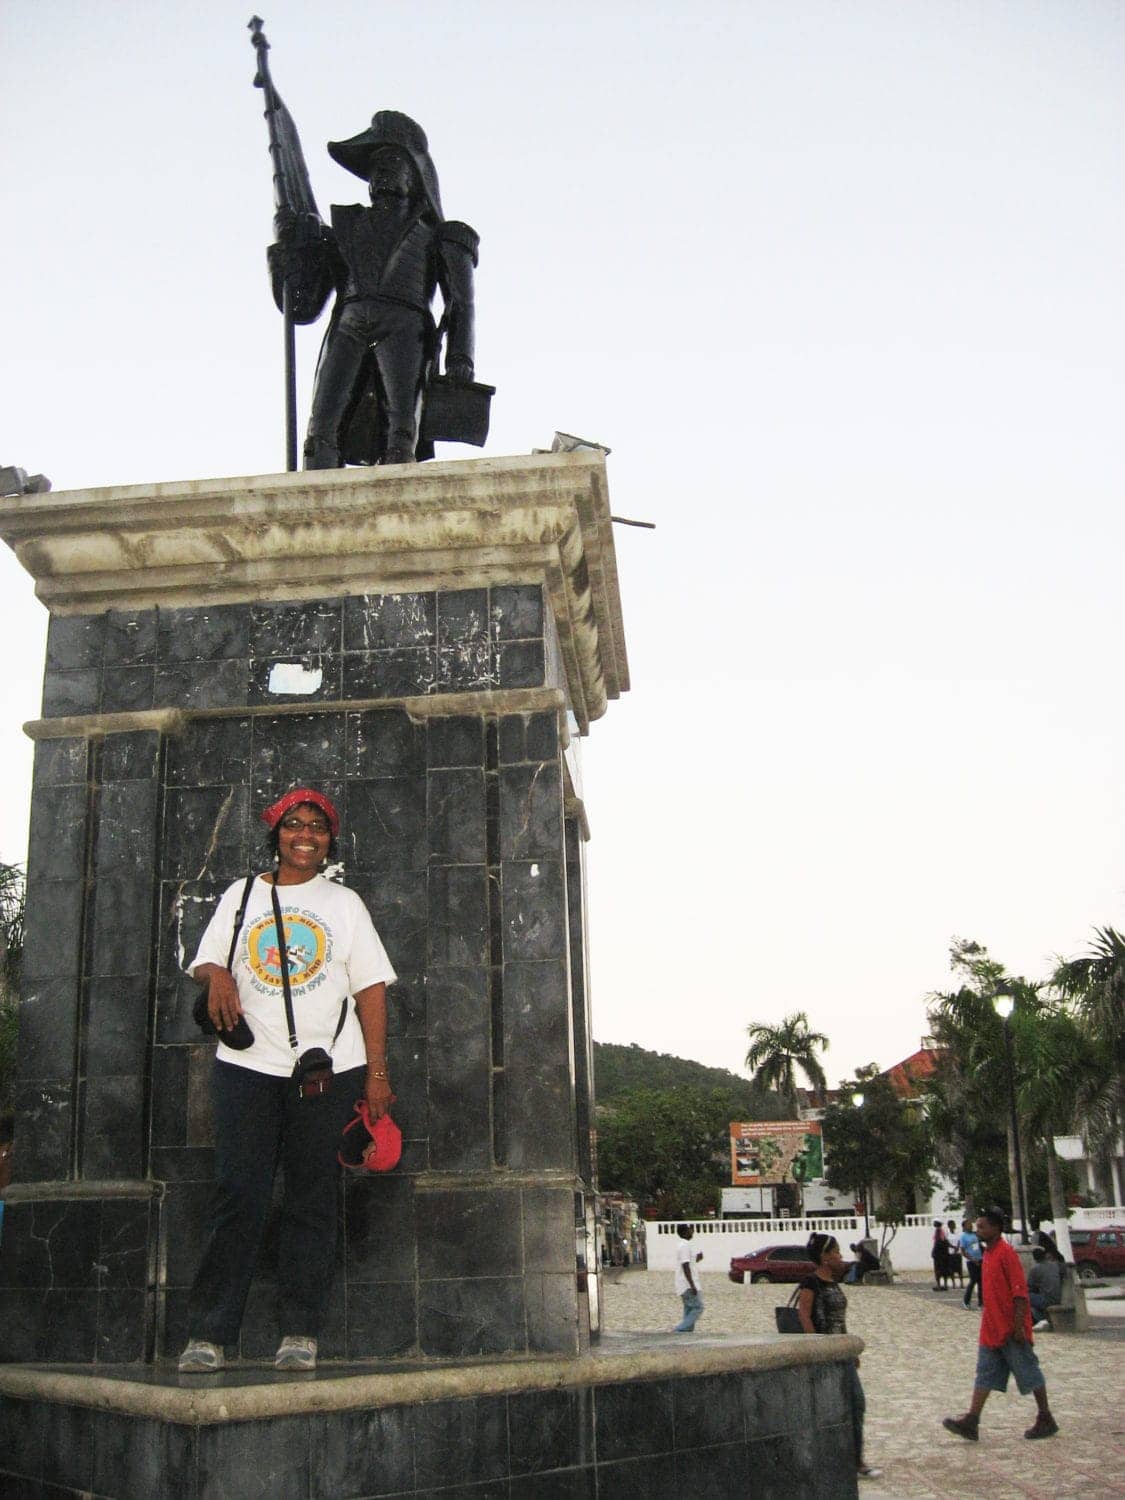 Wanda-stands-at-Haitian-Gen.-Henri-Christophe-statue-in-Cap-Haitian-where-he-led-Haitian-slaves-to-defeat-Napoleon, An epiphany – the largest slave insurrection in US history, Culture Currents 